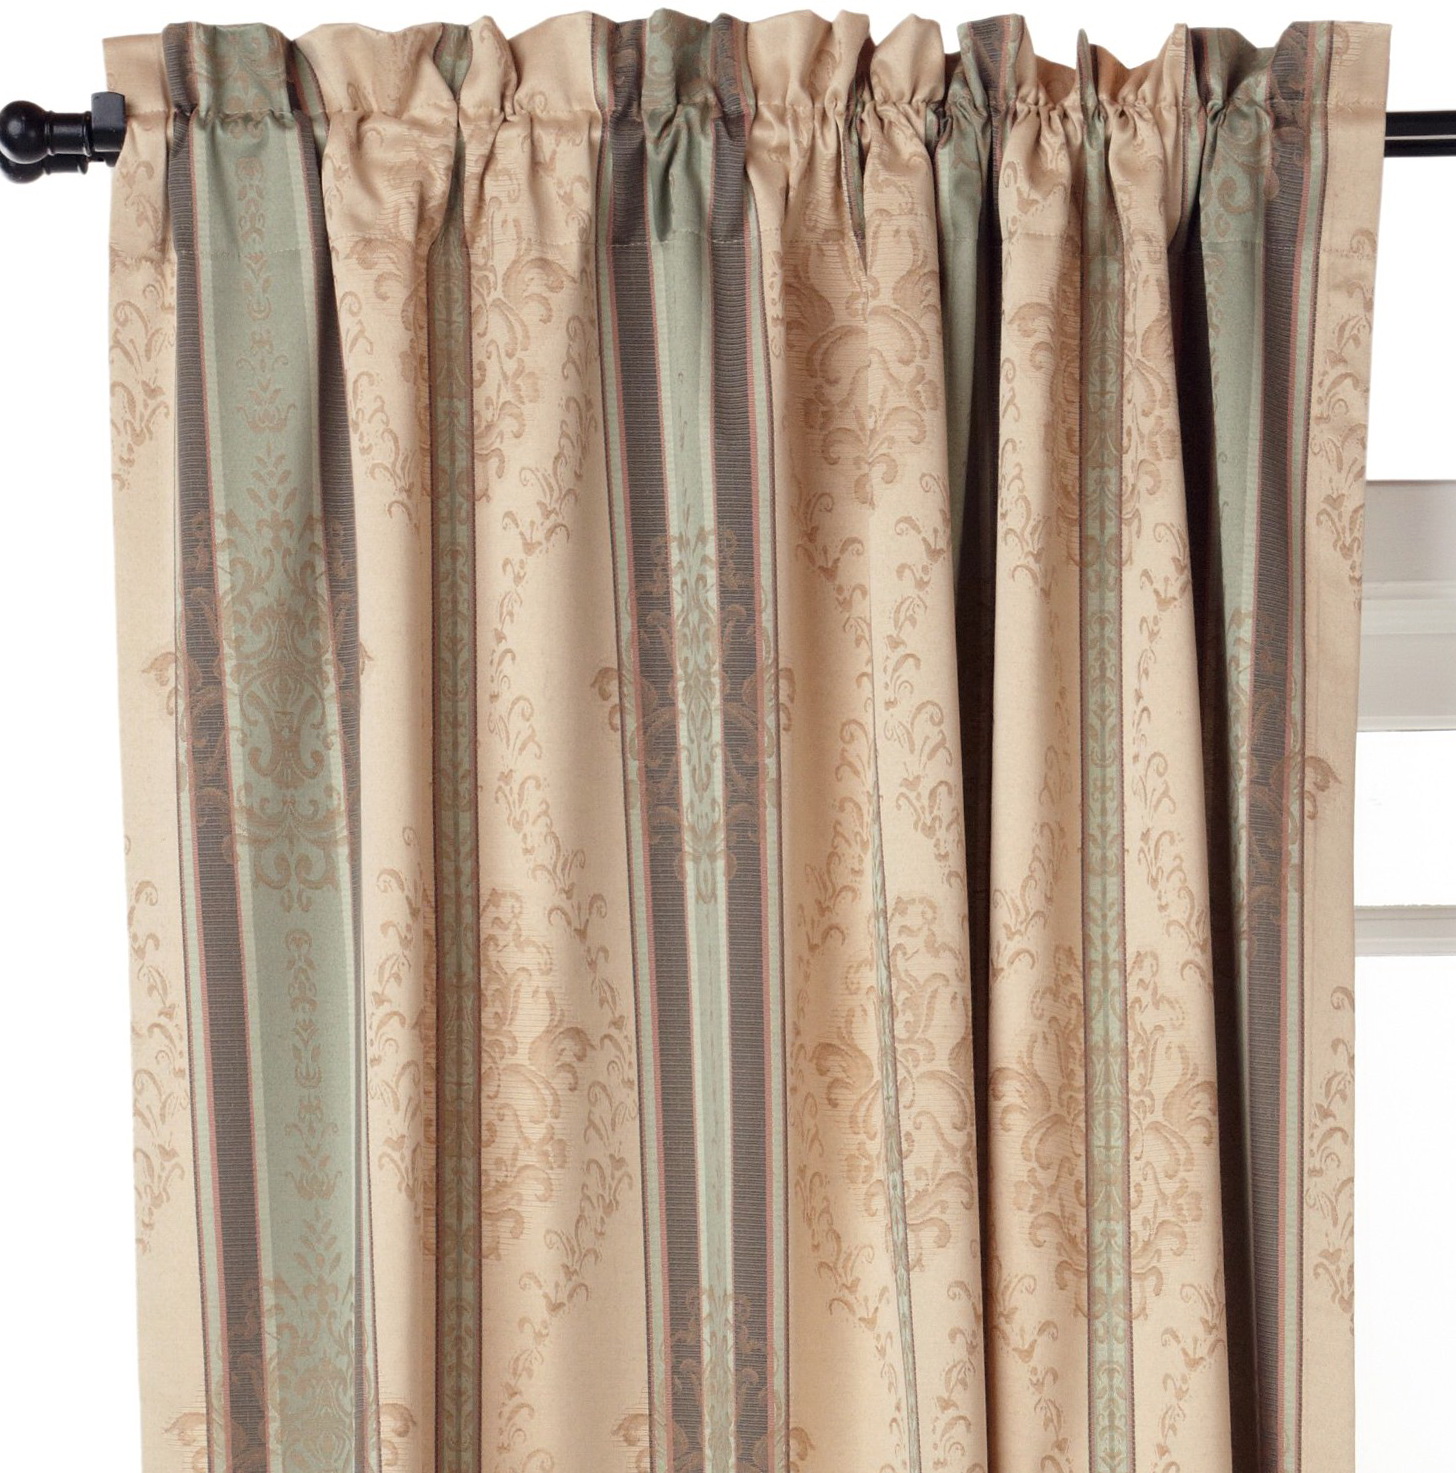 Thermal Backed Curtains Smell | Home Design Ideas